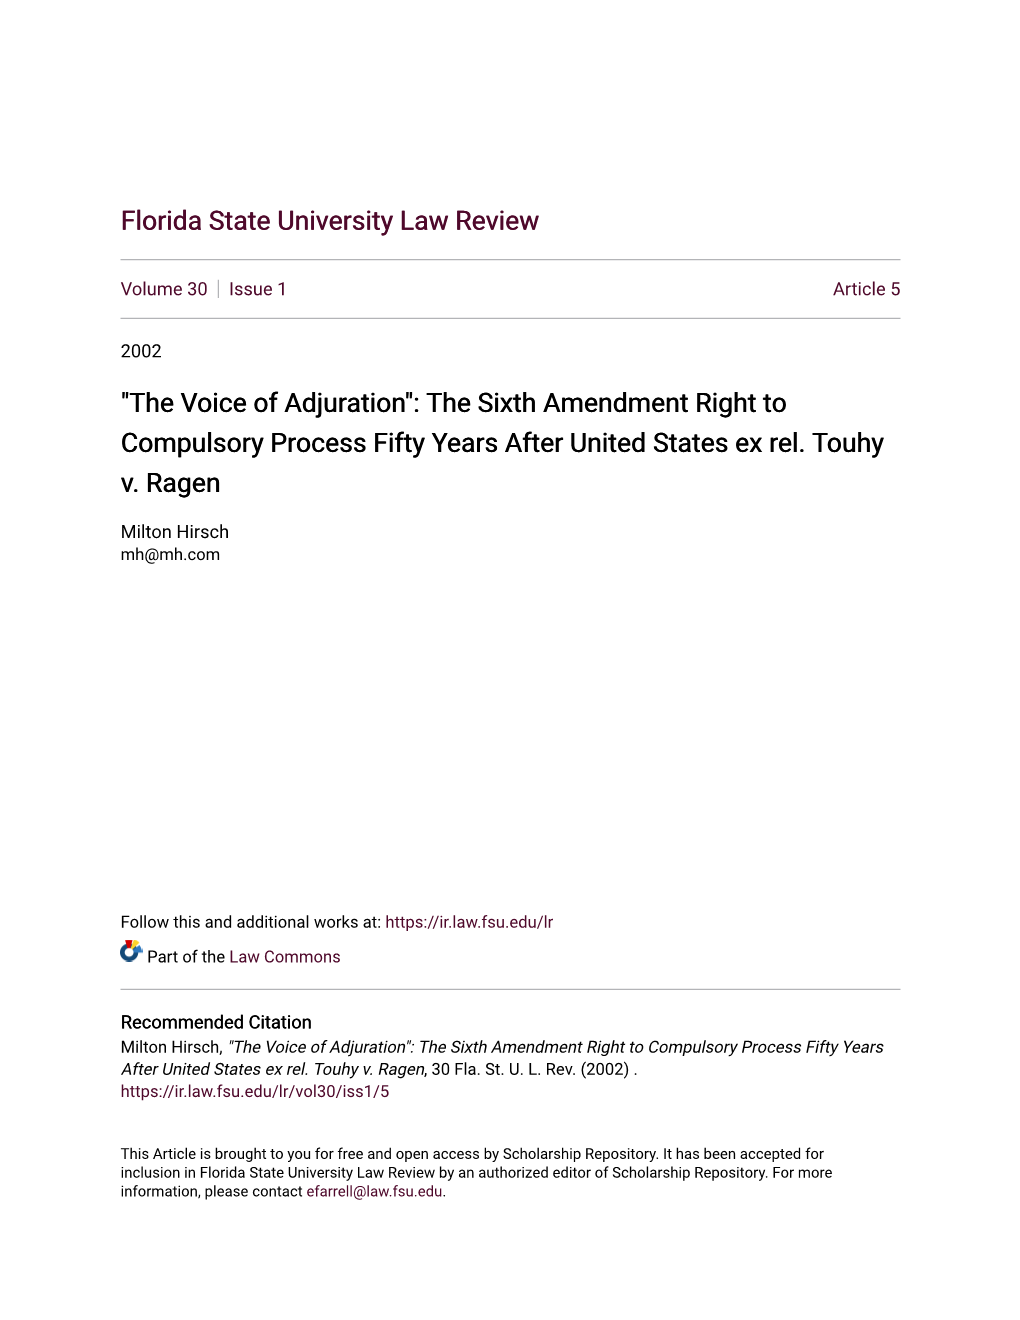 "The Voice of Adjuration": the Sixth Amendment Right to Compulsory Process Fifty Years After United States Ex Rel